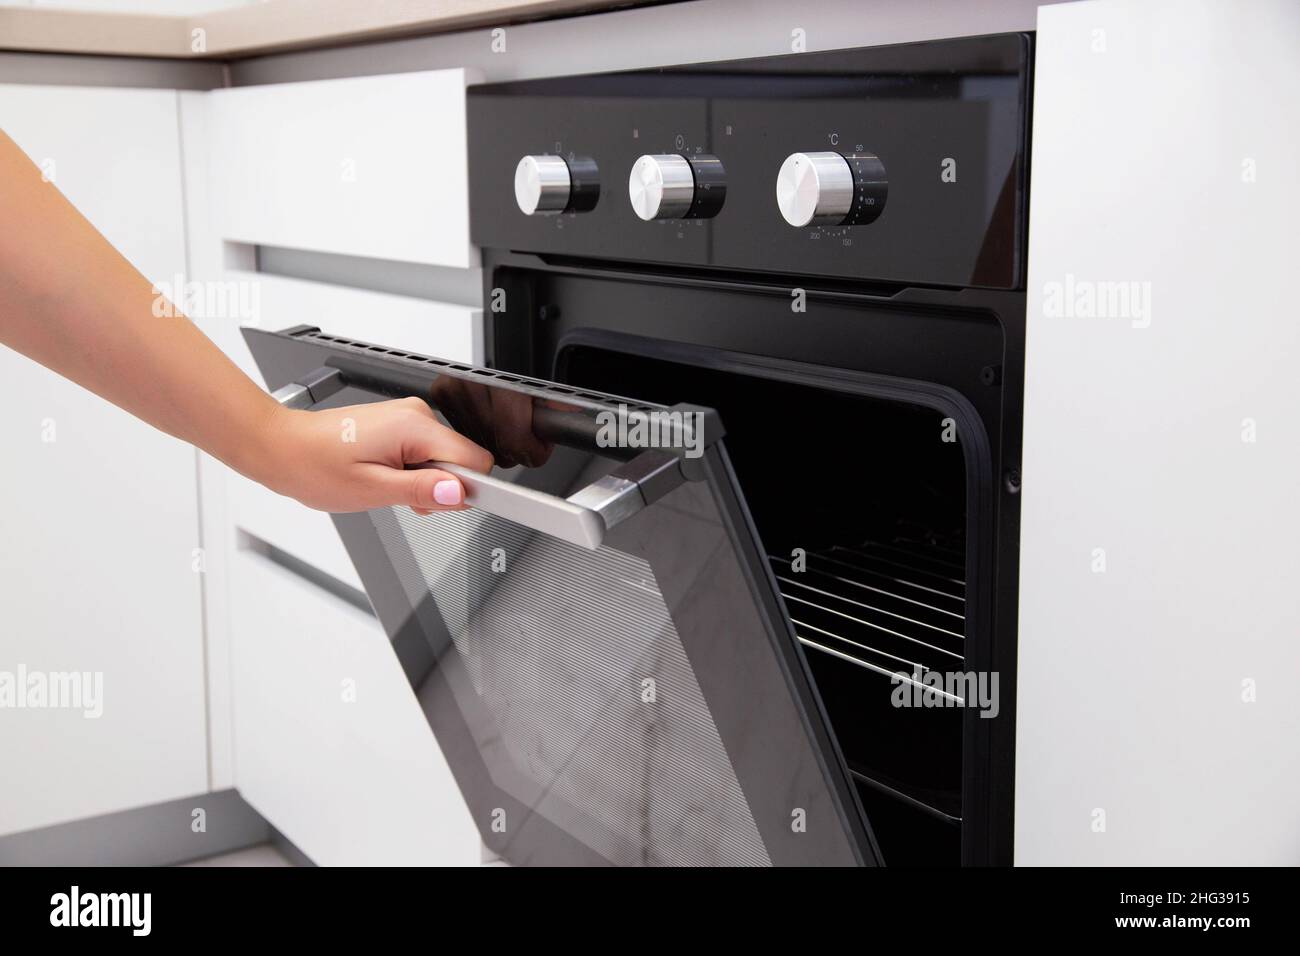 A woman's hand opens the door of an electric convection oven. Built-in oven in the kitchen Stock Photo